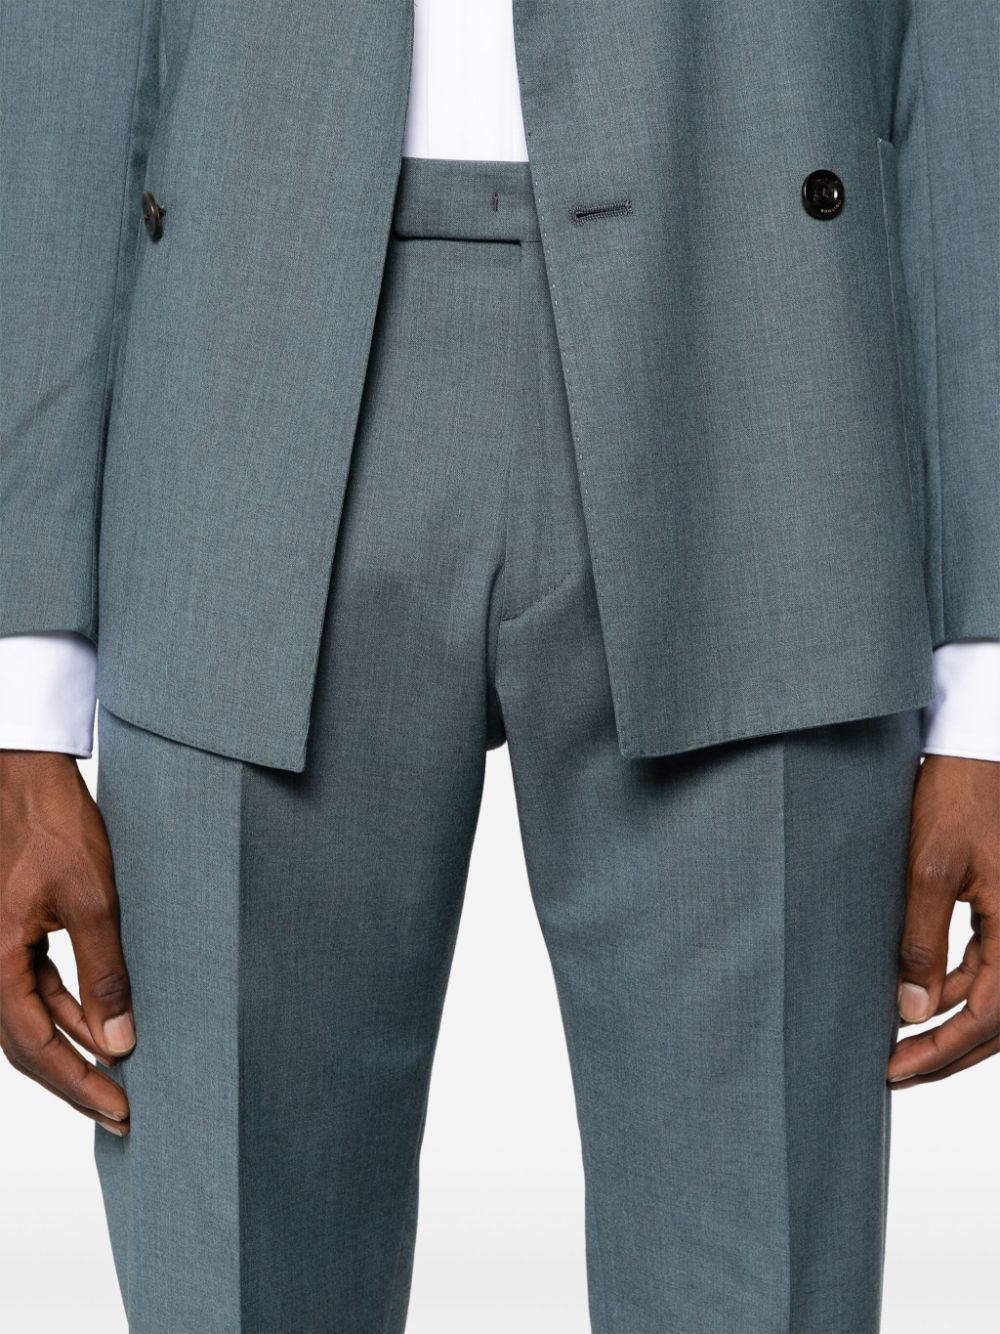 Powder blue double-breasted suit